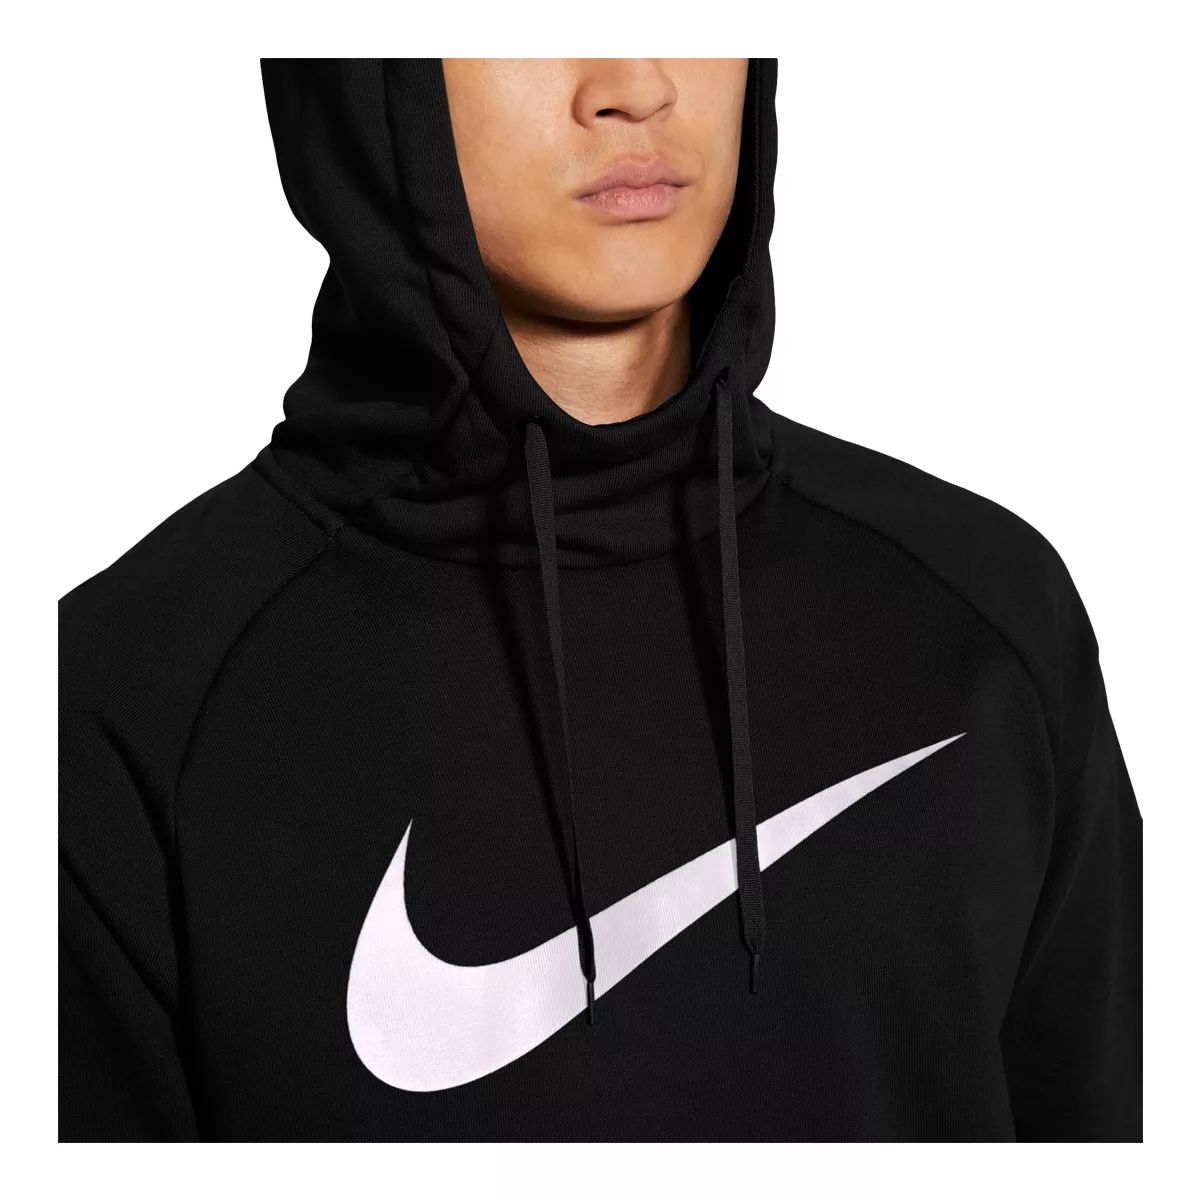 https://media-www.atmosphere.ca/product/div-03-softgoods/dpt-70-athletic-clothing/sdpt-01-mens/333300557/nike-dry-swoosh-po-hood-q121-black-white-s--c7895213-c639-4a8f-ae76-54c79f25b170-jpgrendition.jpg?imdensity=1&imwidth=1244&impolicy=mZoom